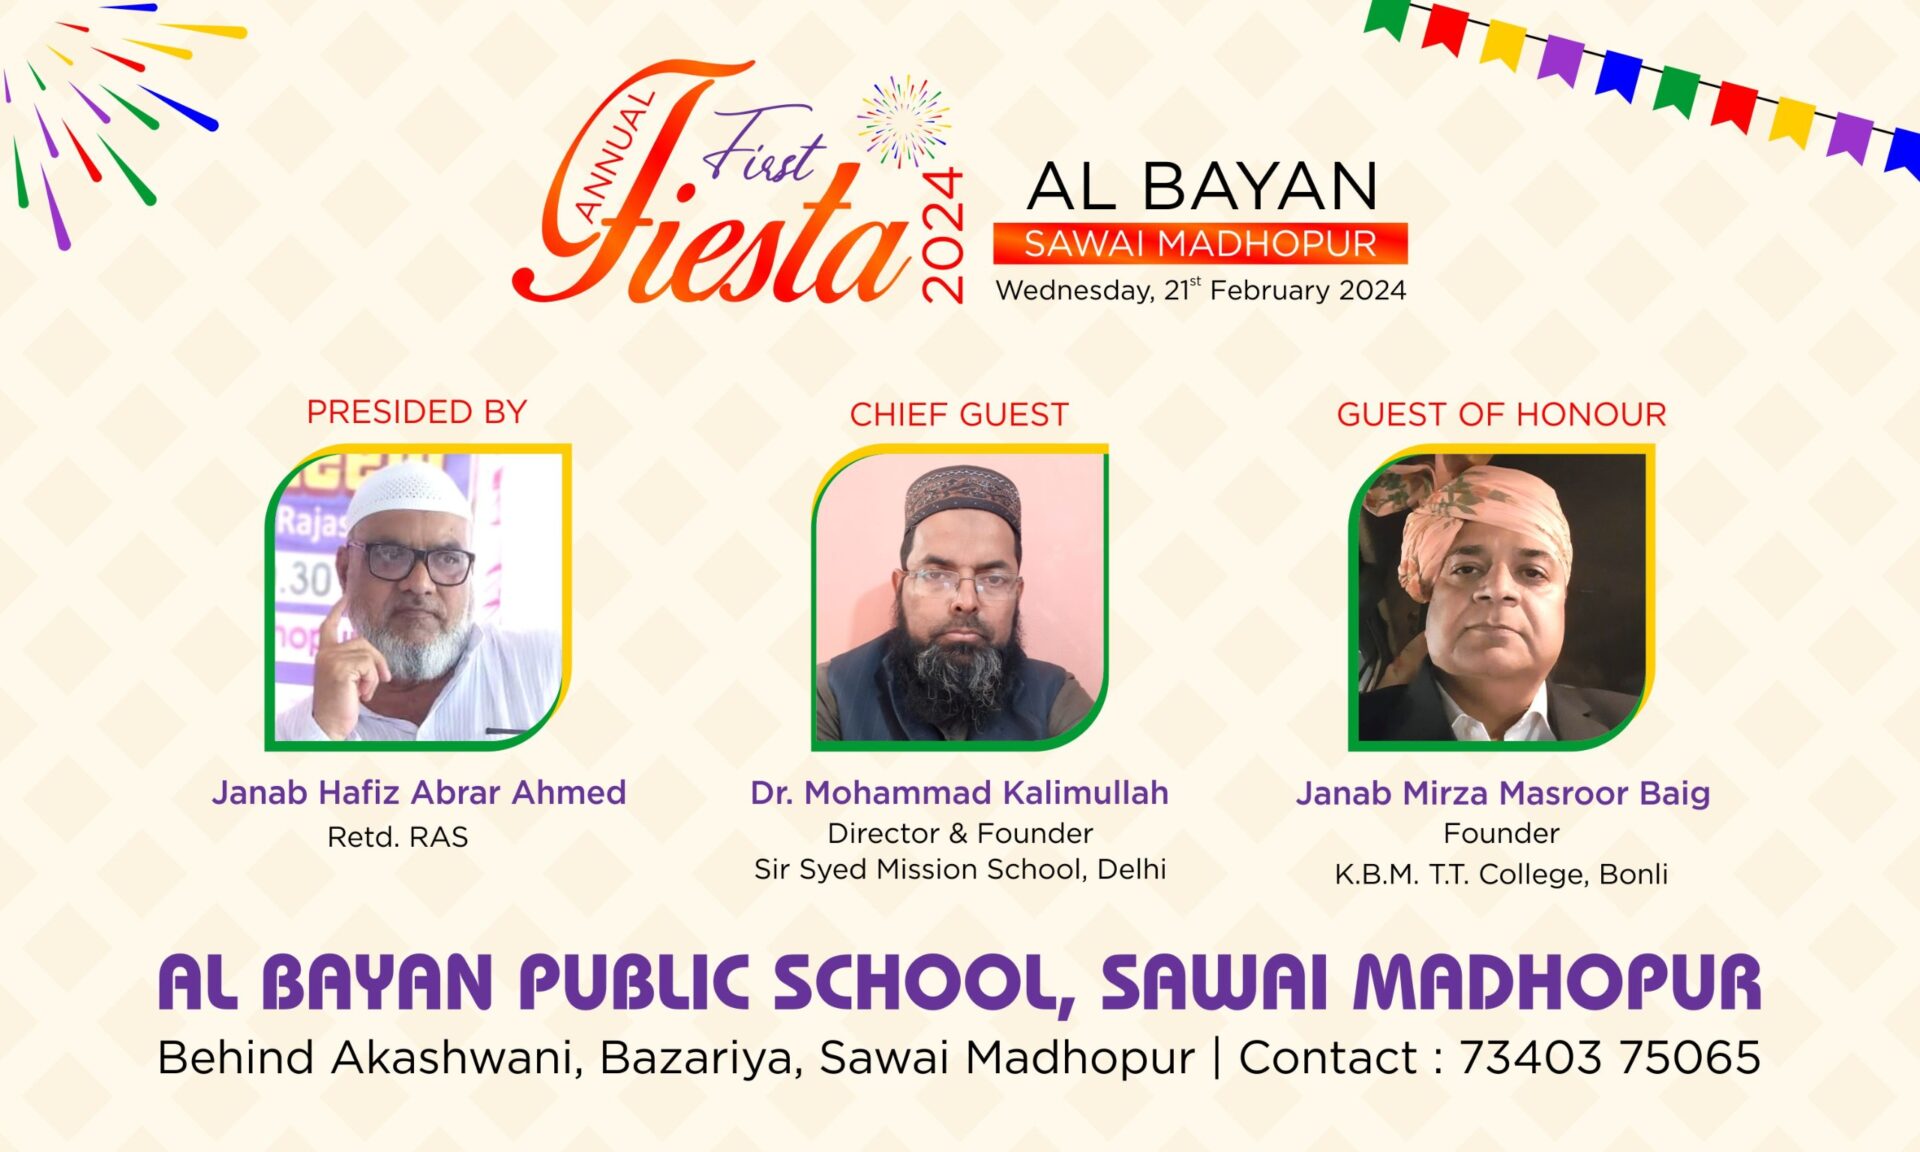 Al Bayan Public School Sawai Madhopur's annual function will be held today evening
